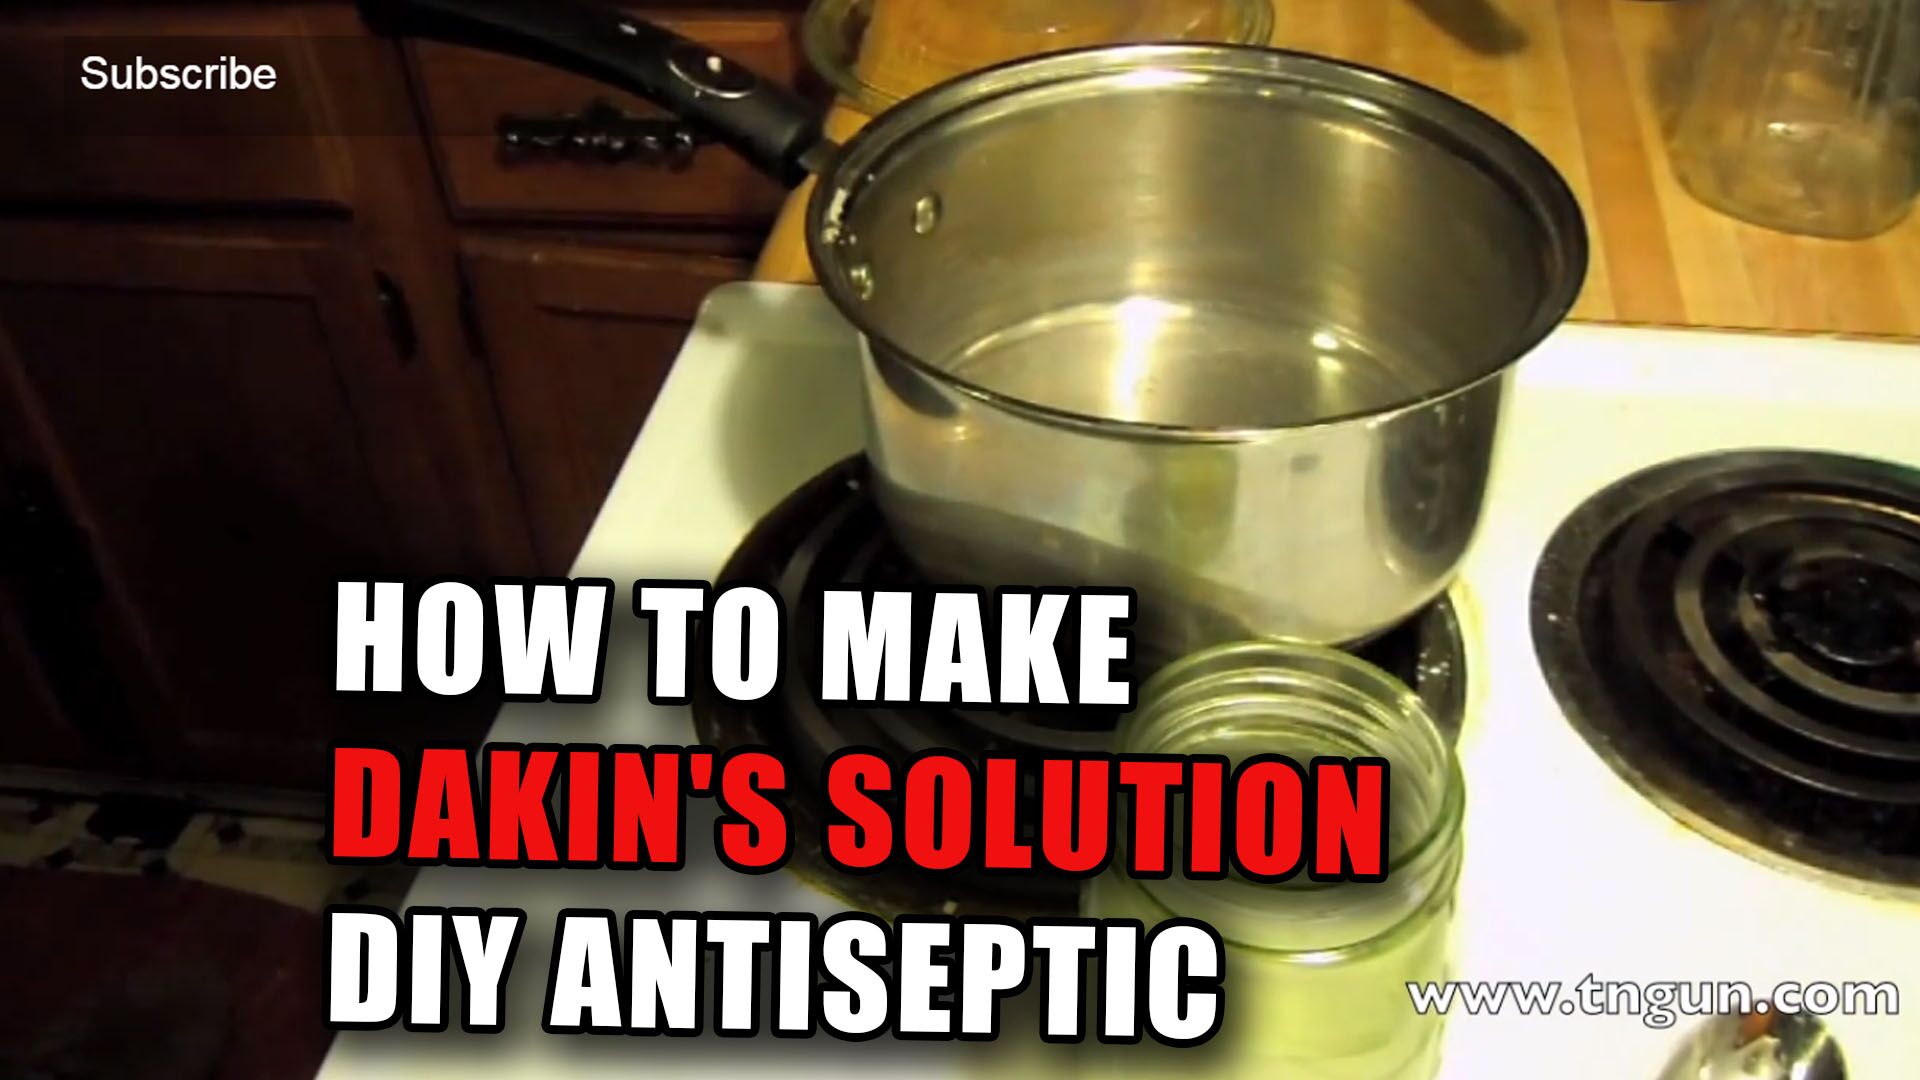 How to Make Dakin's Solution DIY Antiseptic